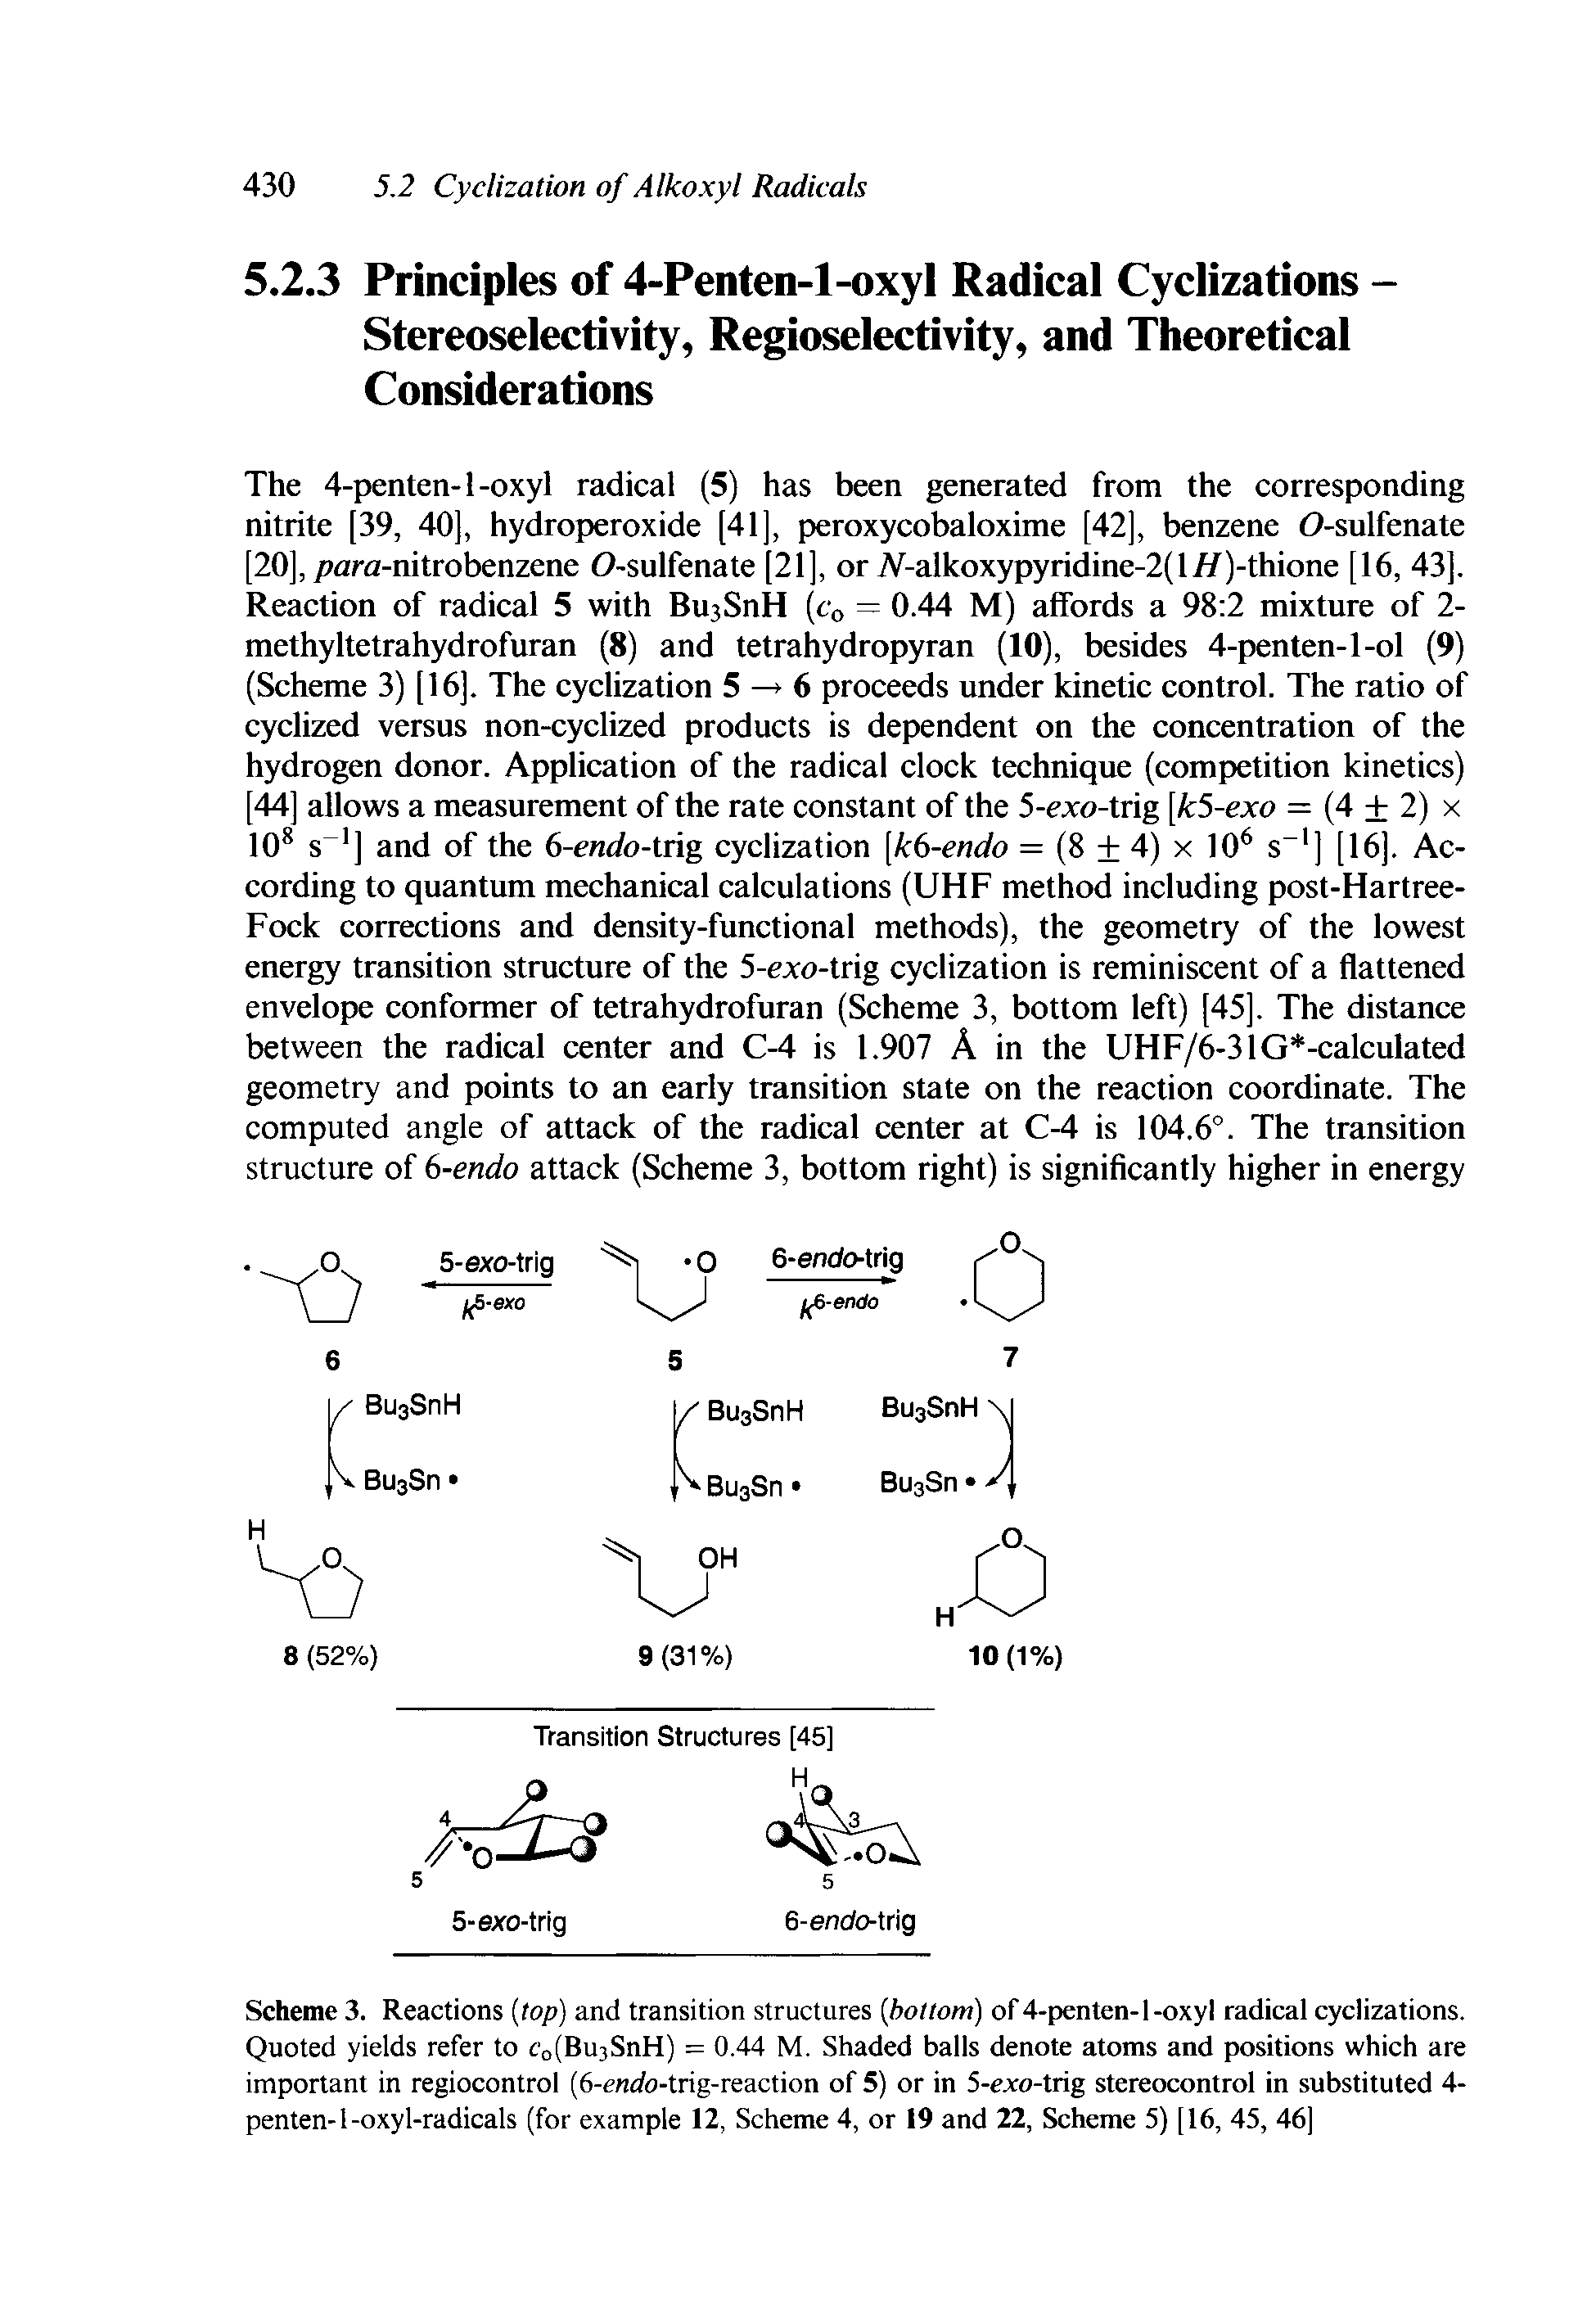 Scheme 3. Reactions top) and transition structures bottom) of 4-penten-l-oxyl radieal cyclizations. Quoted yields refer to c o(Bu3SnH) = 0.44 M. Shaded balls denote atoms and positions which are important in regiocontrol (6-endo-trig-reaction of 5) or in 5-exo-trig stereocontrol in substituted 4-penten-l-oxy 1-radicals (for example 12, Scheme 4, or 19 and 22, Scheme 5) [16, 45, 46]...